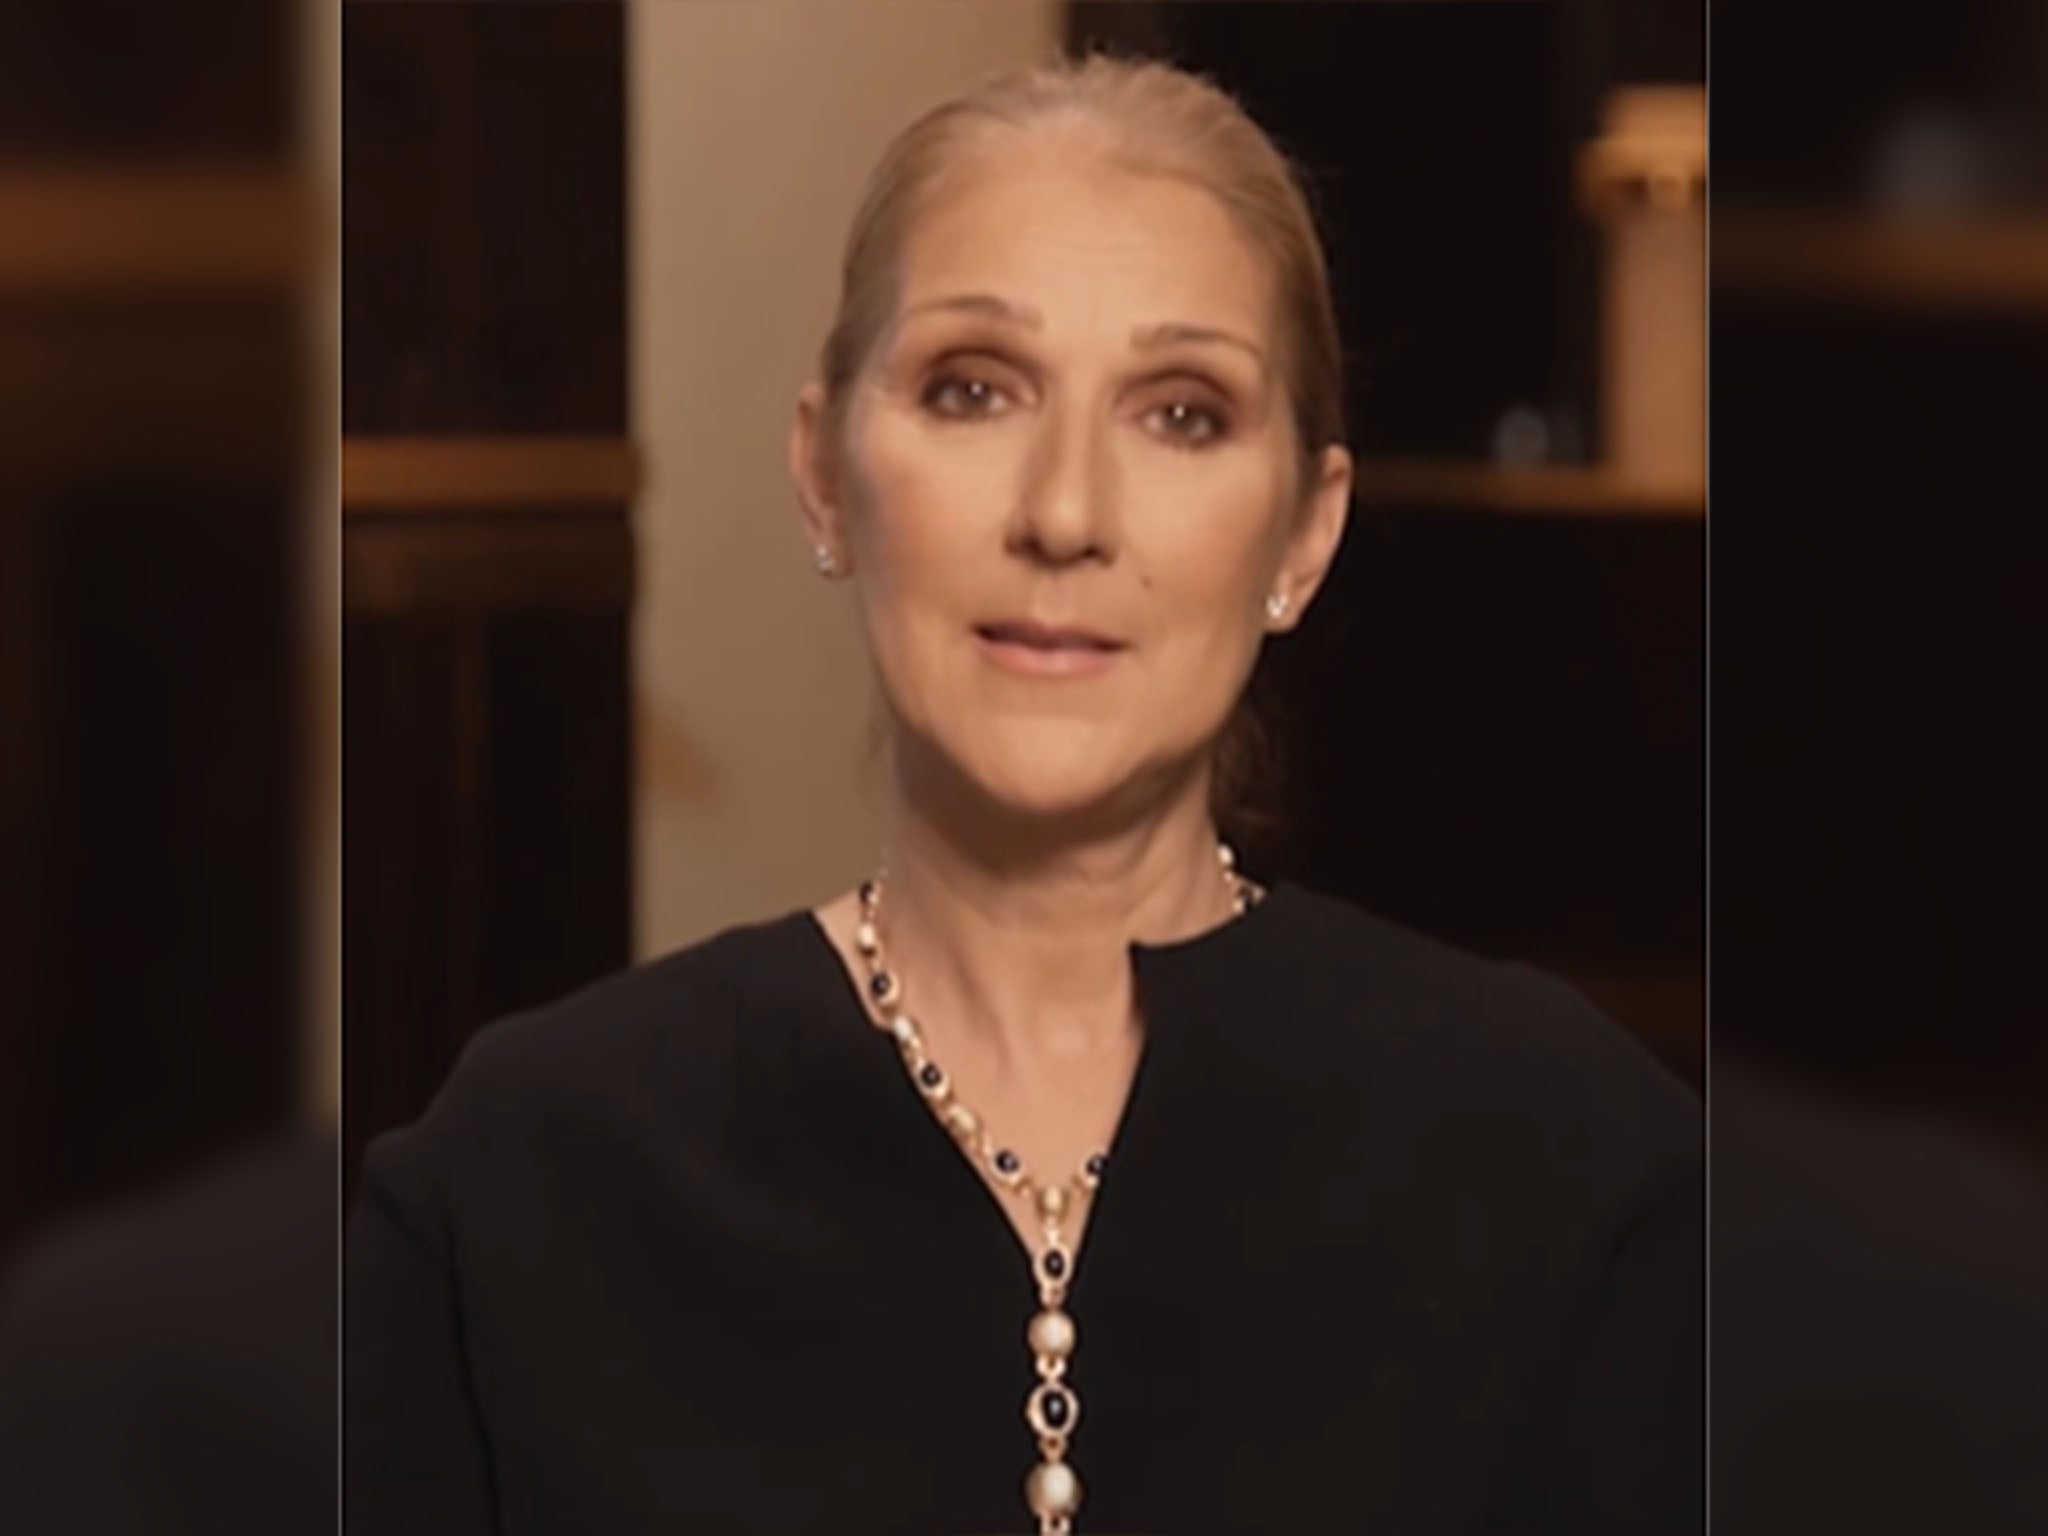 Singer Celine Dion revealed she had the condition earlier this month